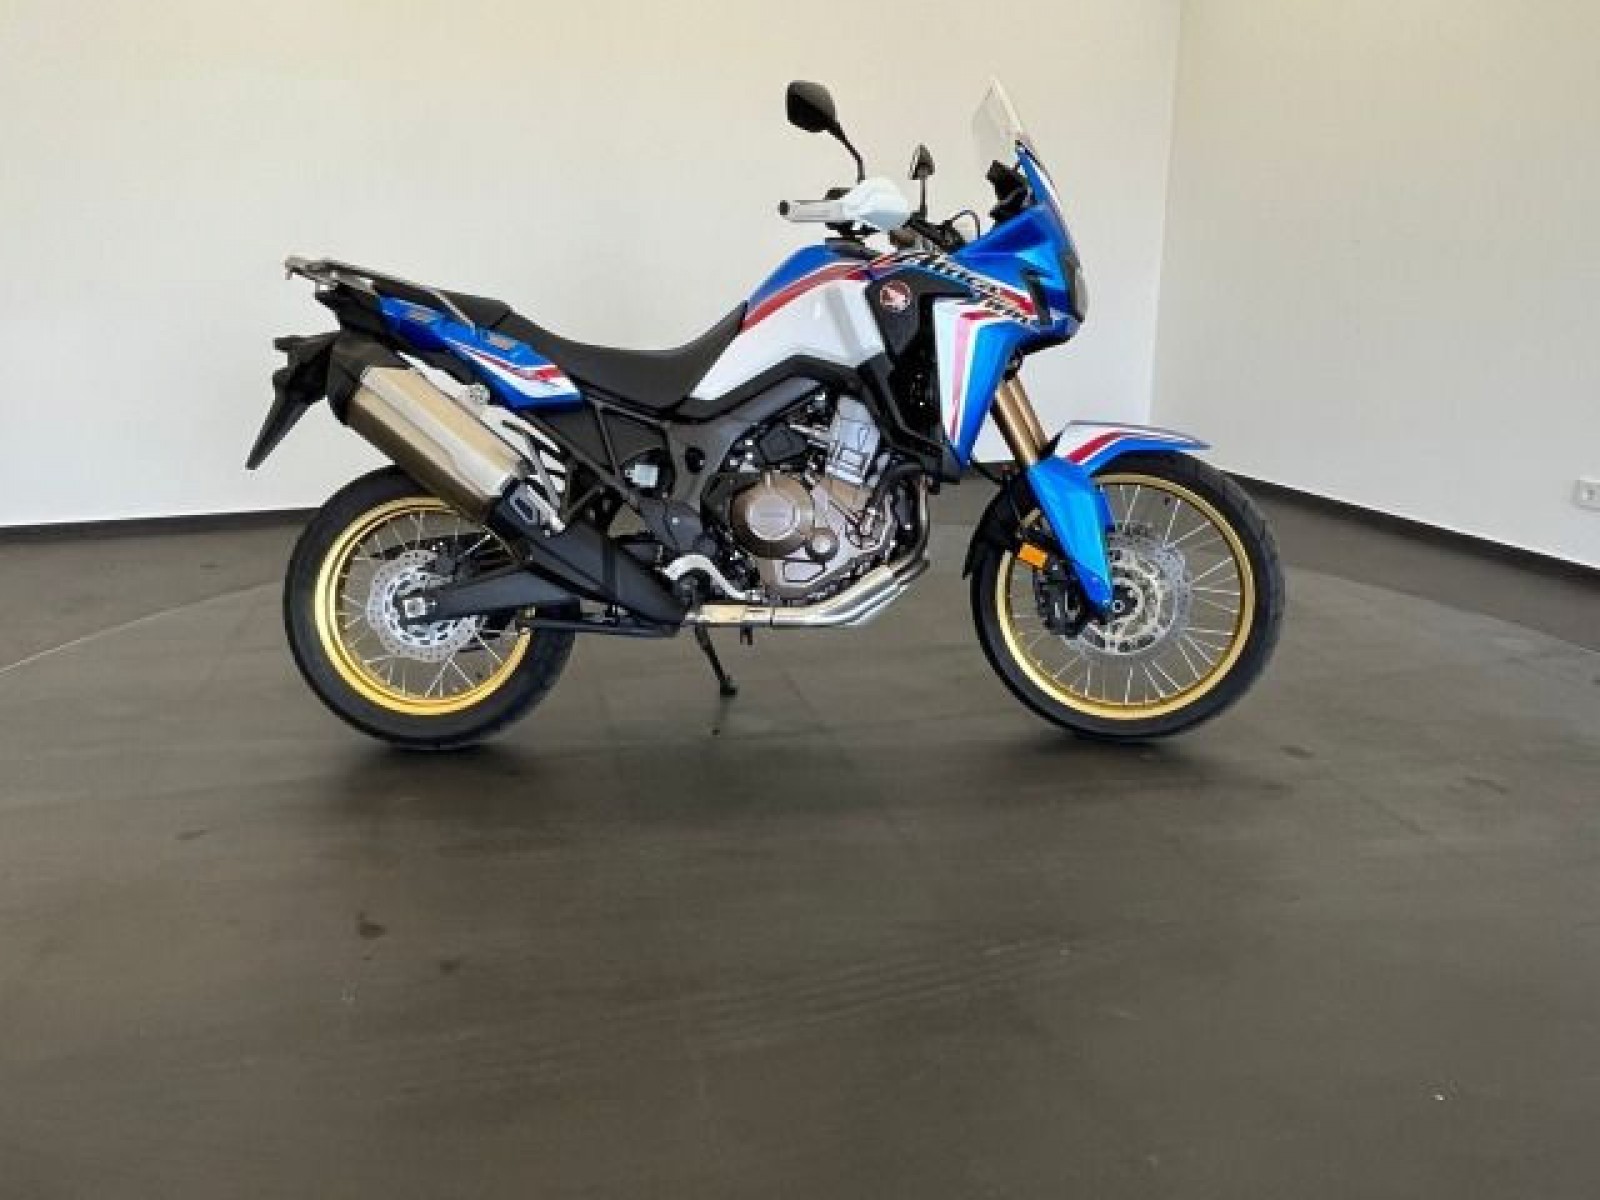 CRF1000A Africa Twin